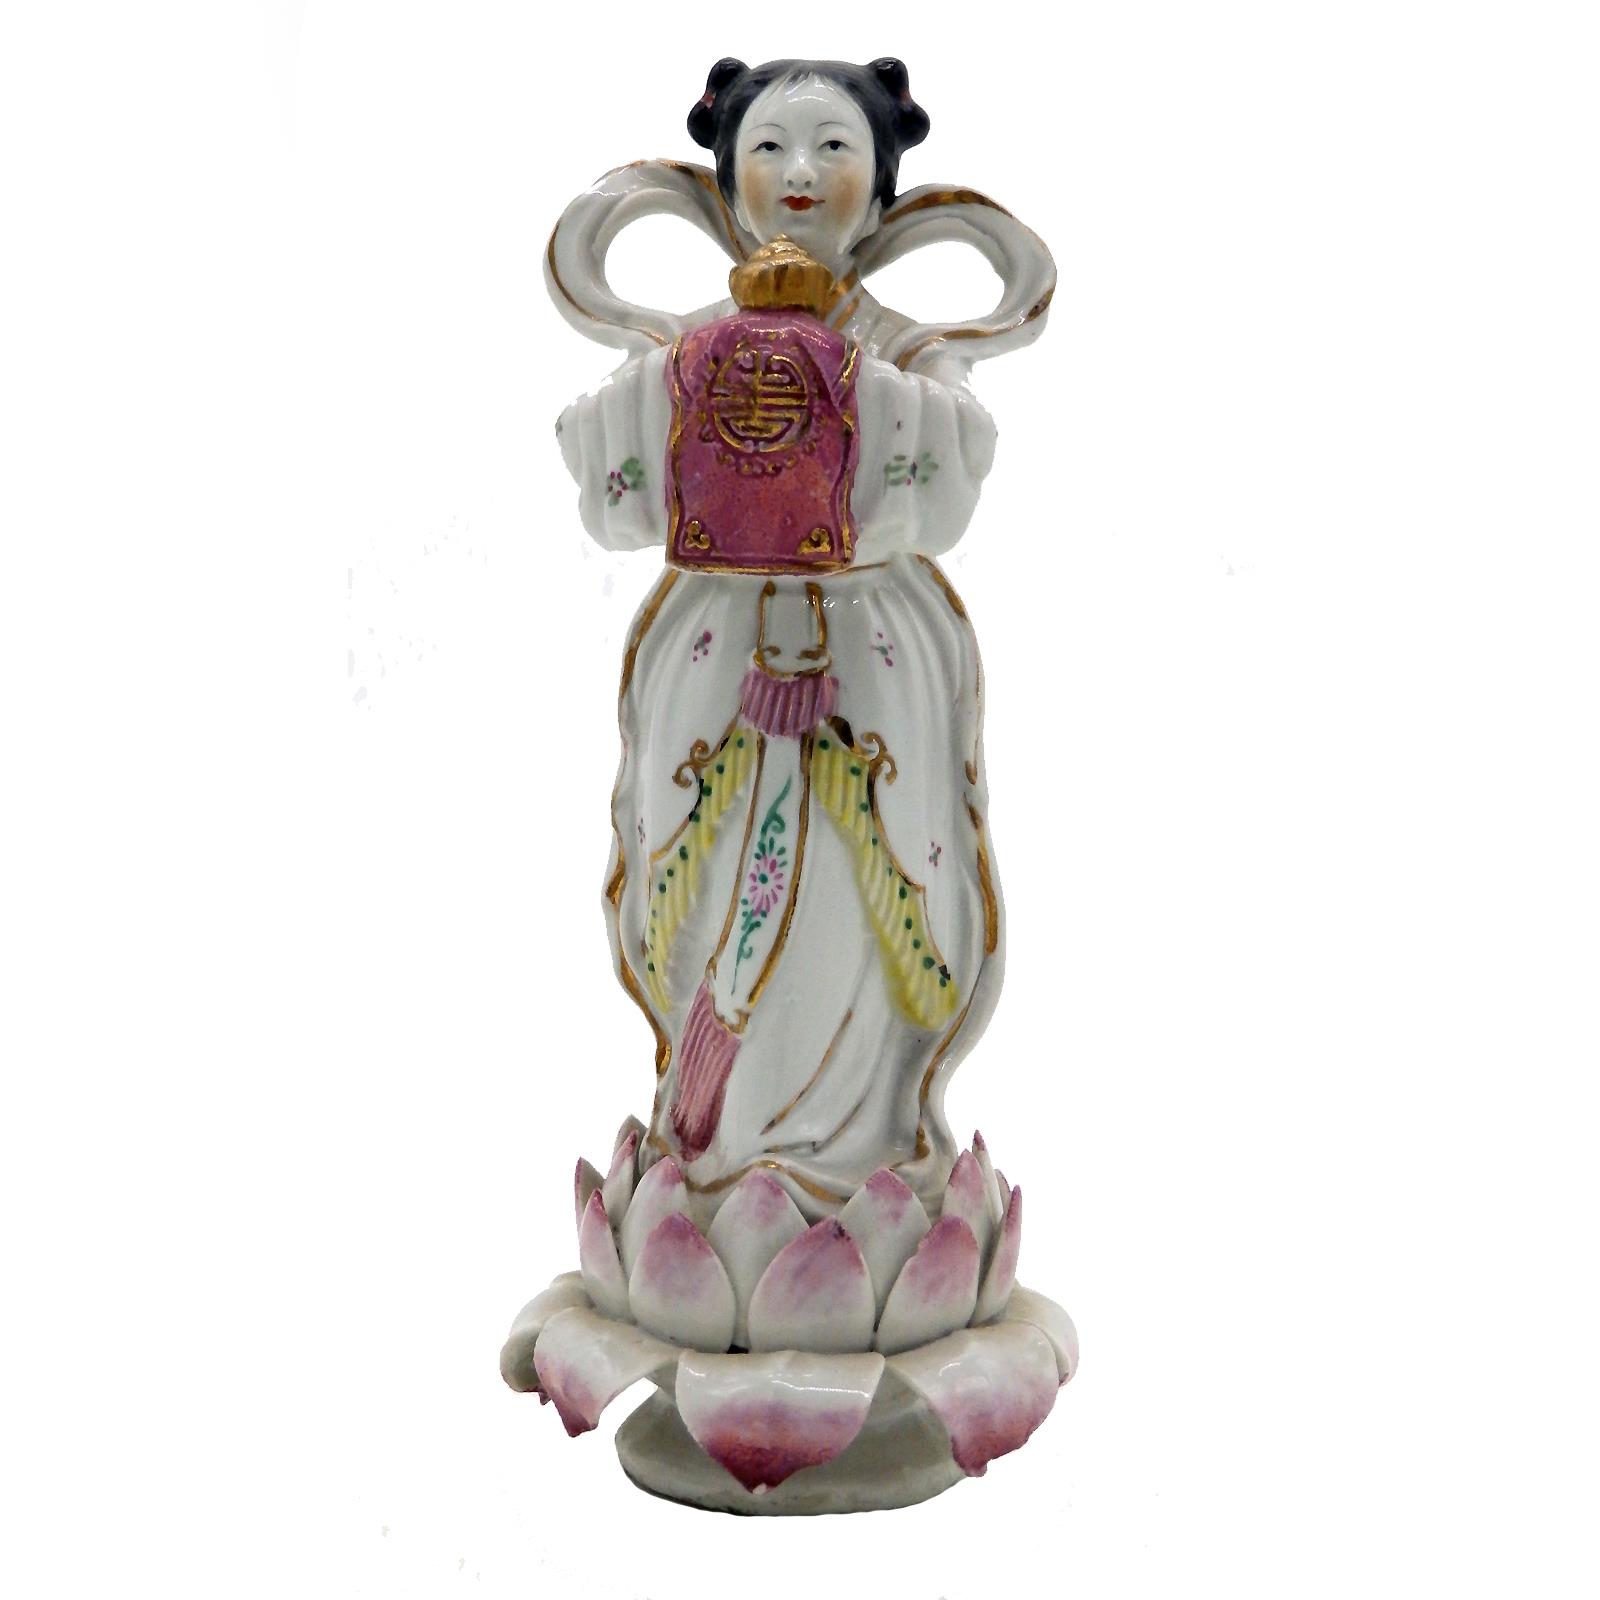 A Chinese porcelain Figure of girl stood on a lotus flower C1900 +